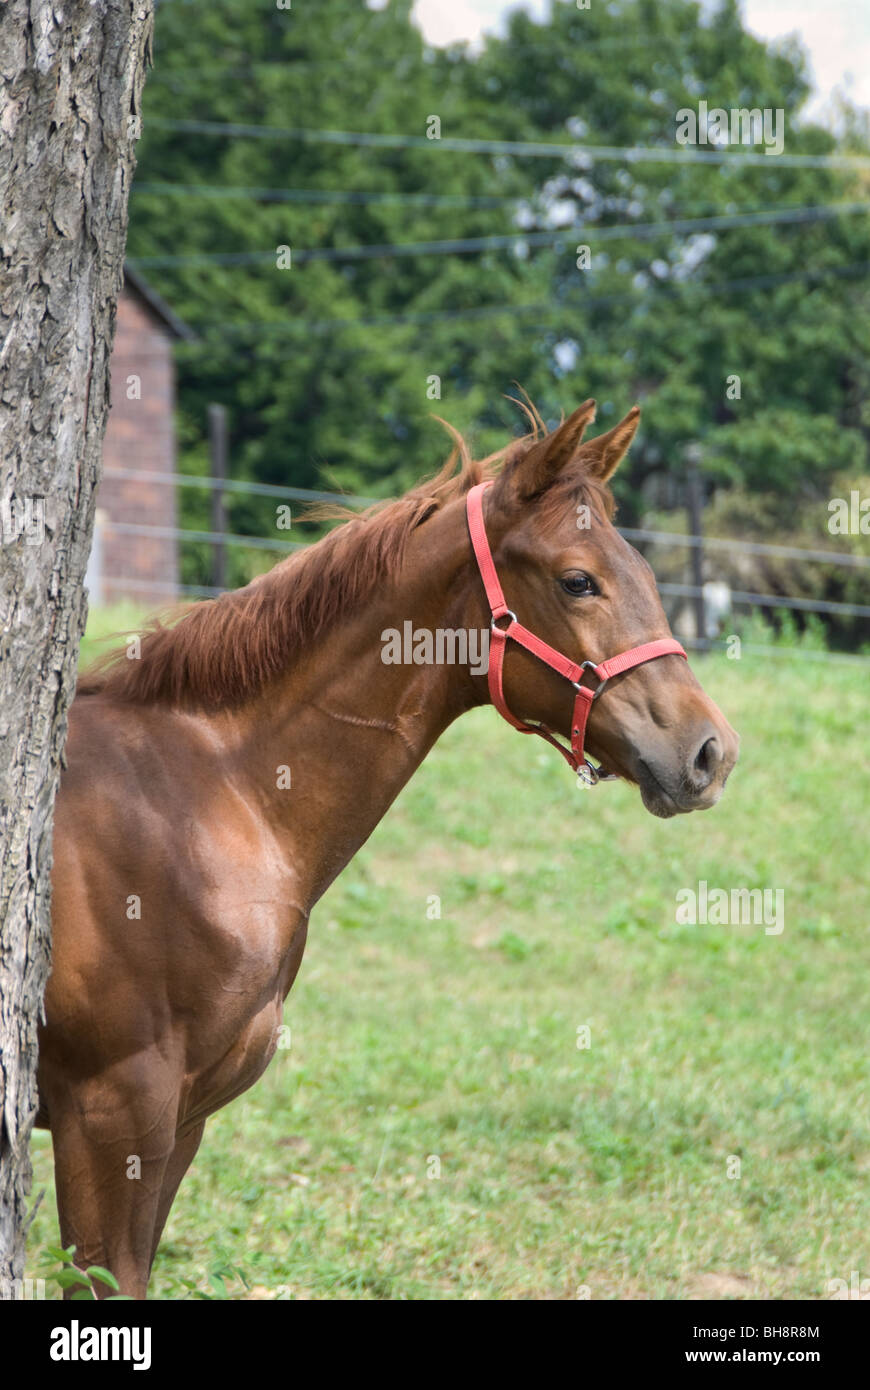 Stock photo of yearling horse in summer pasture, side view. Stock Photo